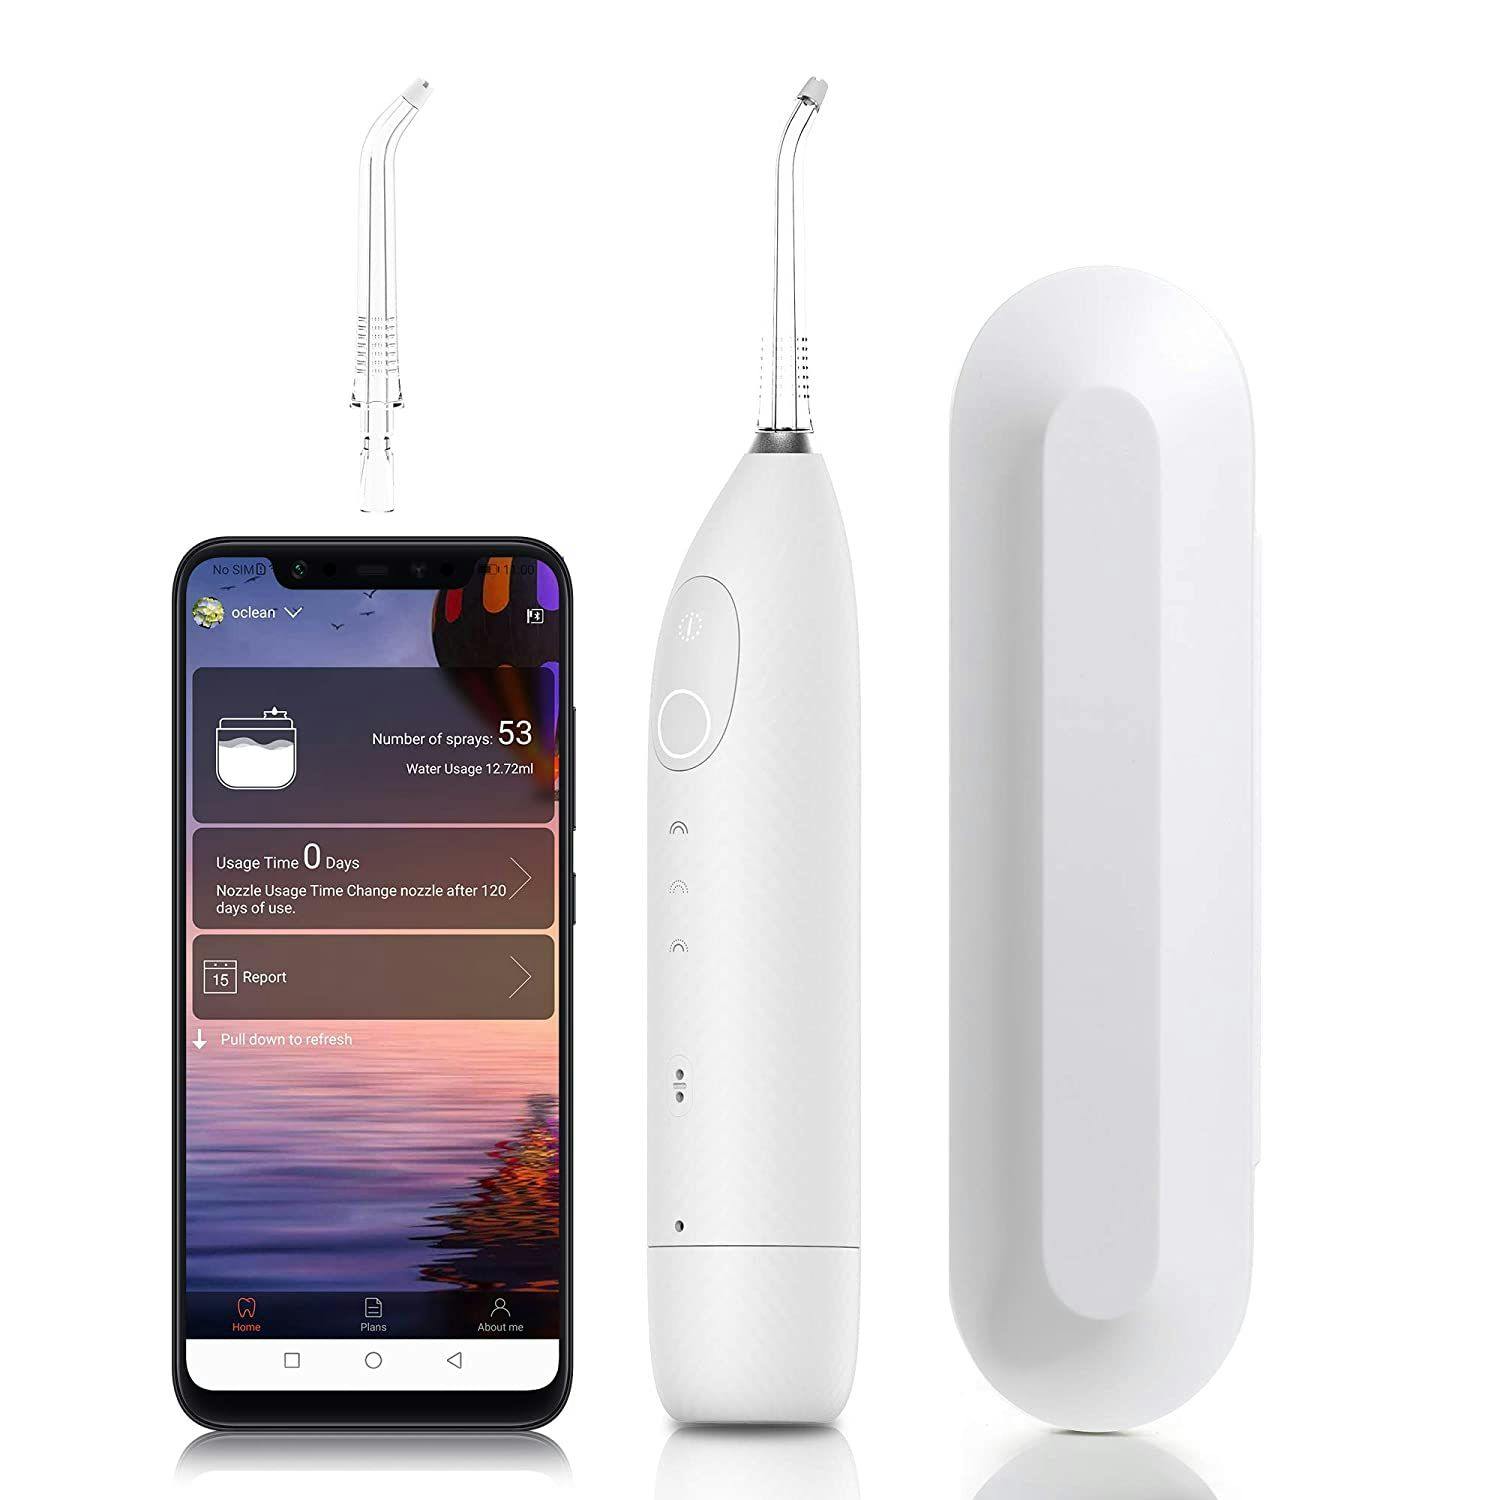 New small, smart oral irrigator designed to help with oral care on the go